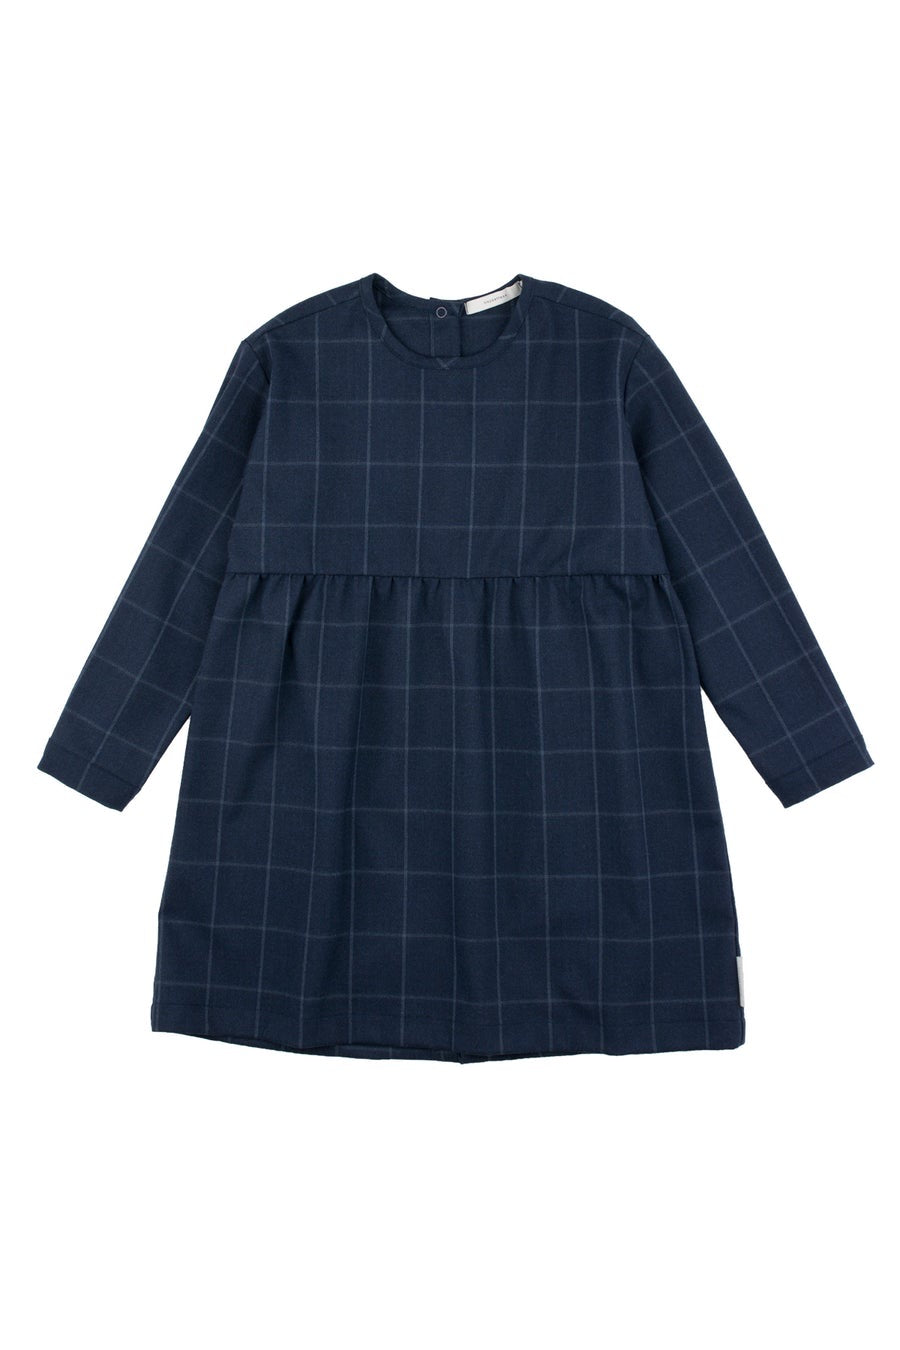 [12/18m] TinyCottons Grid Flannel Dress